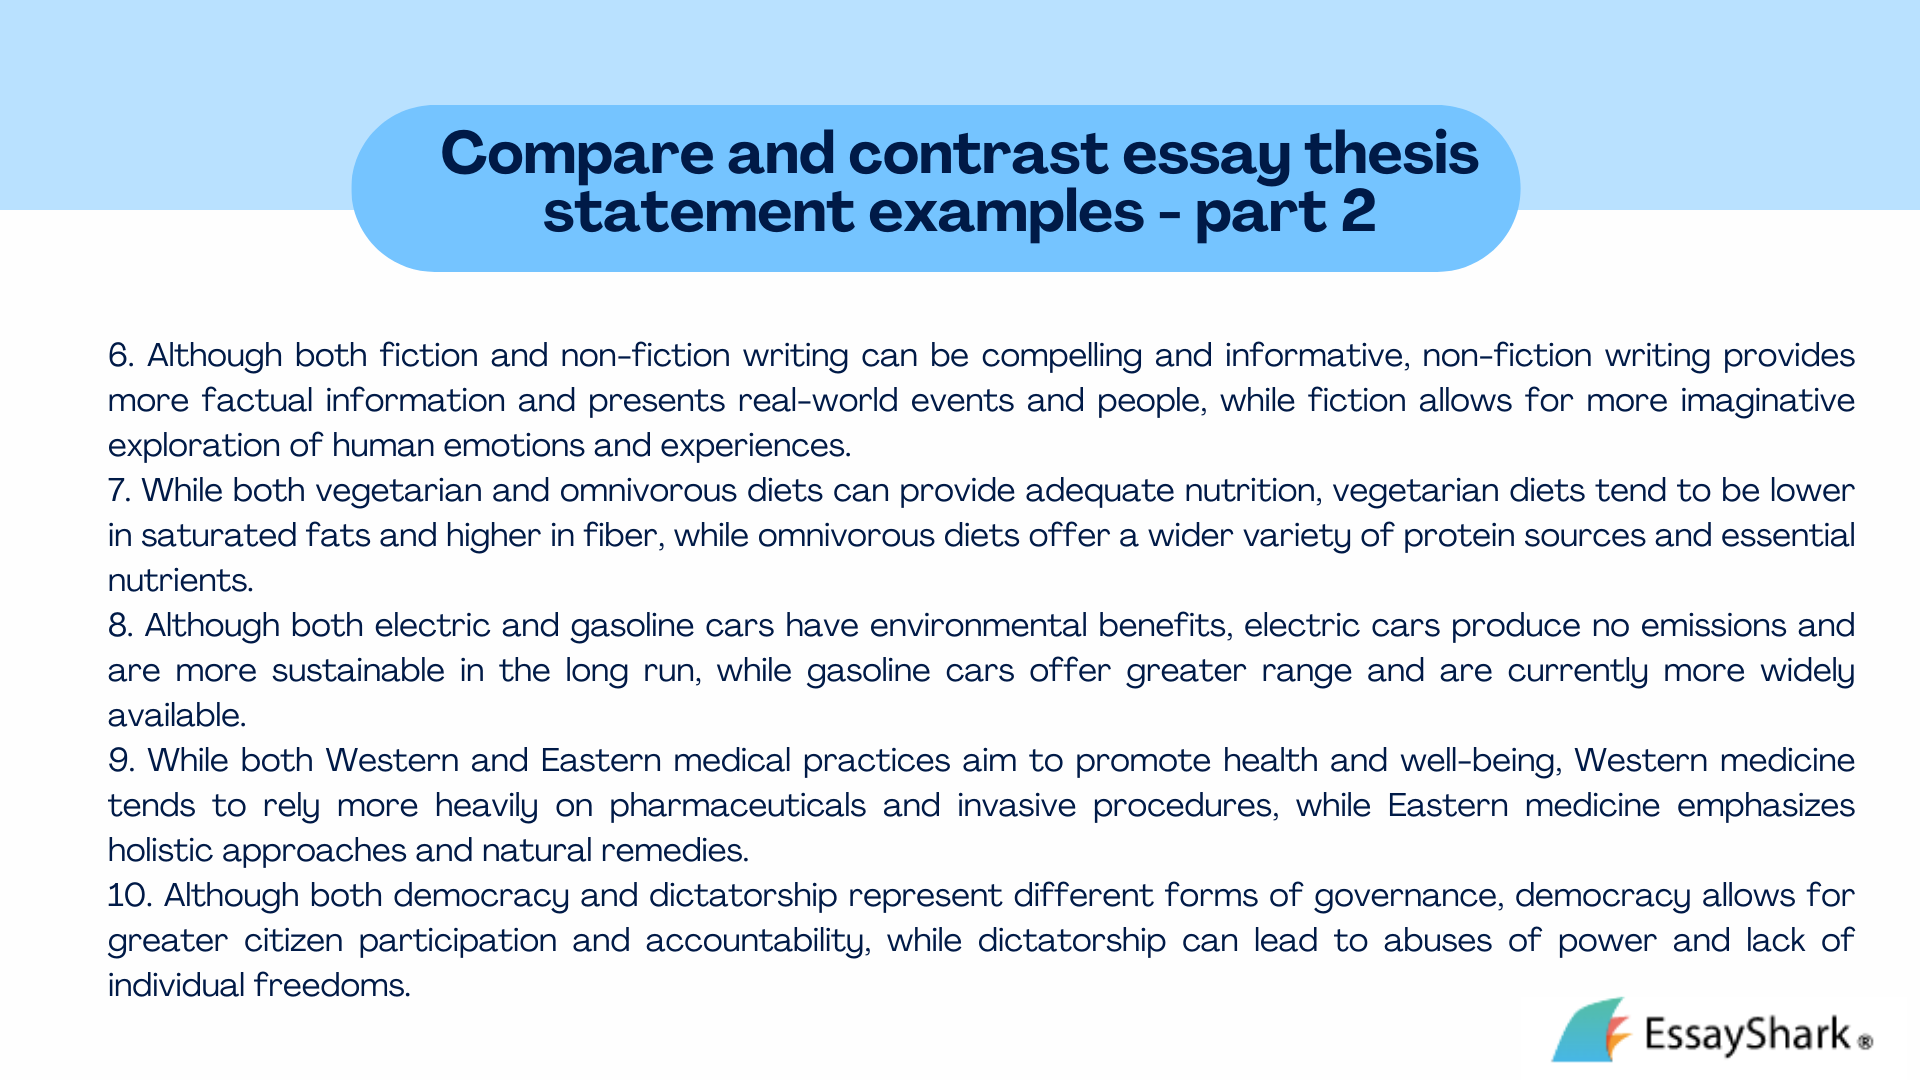 thesis statement on compare and contrast essay